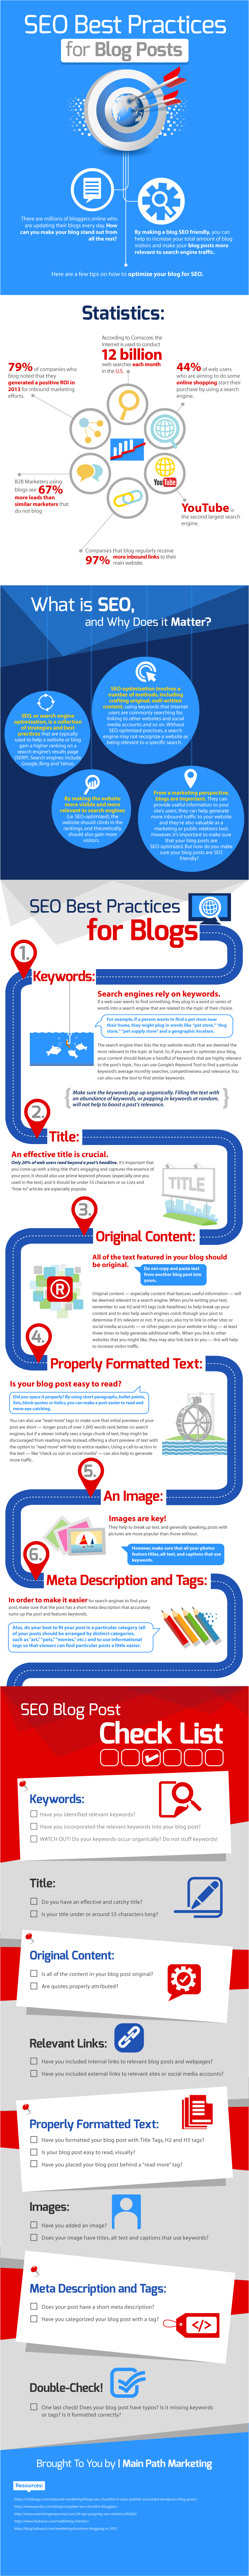 SEO Best Practices for Blog Posts